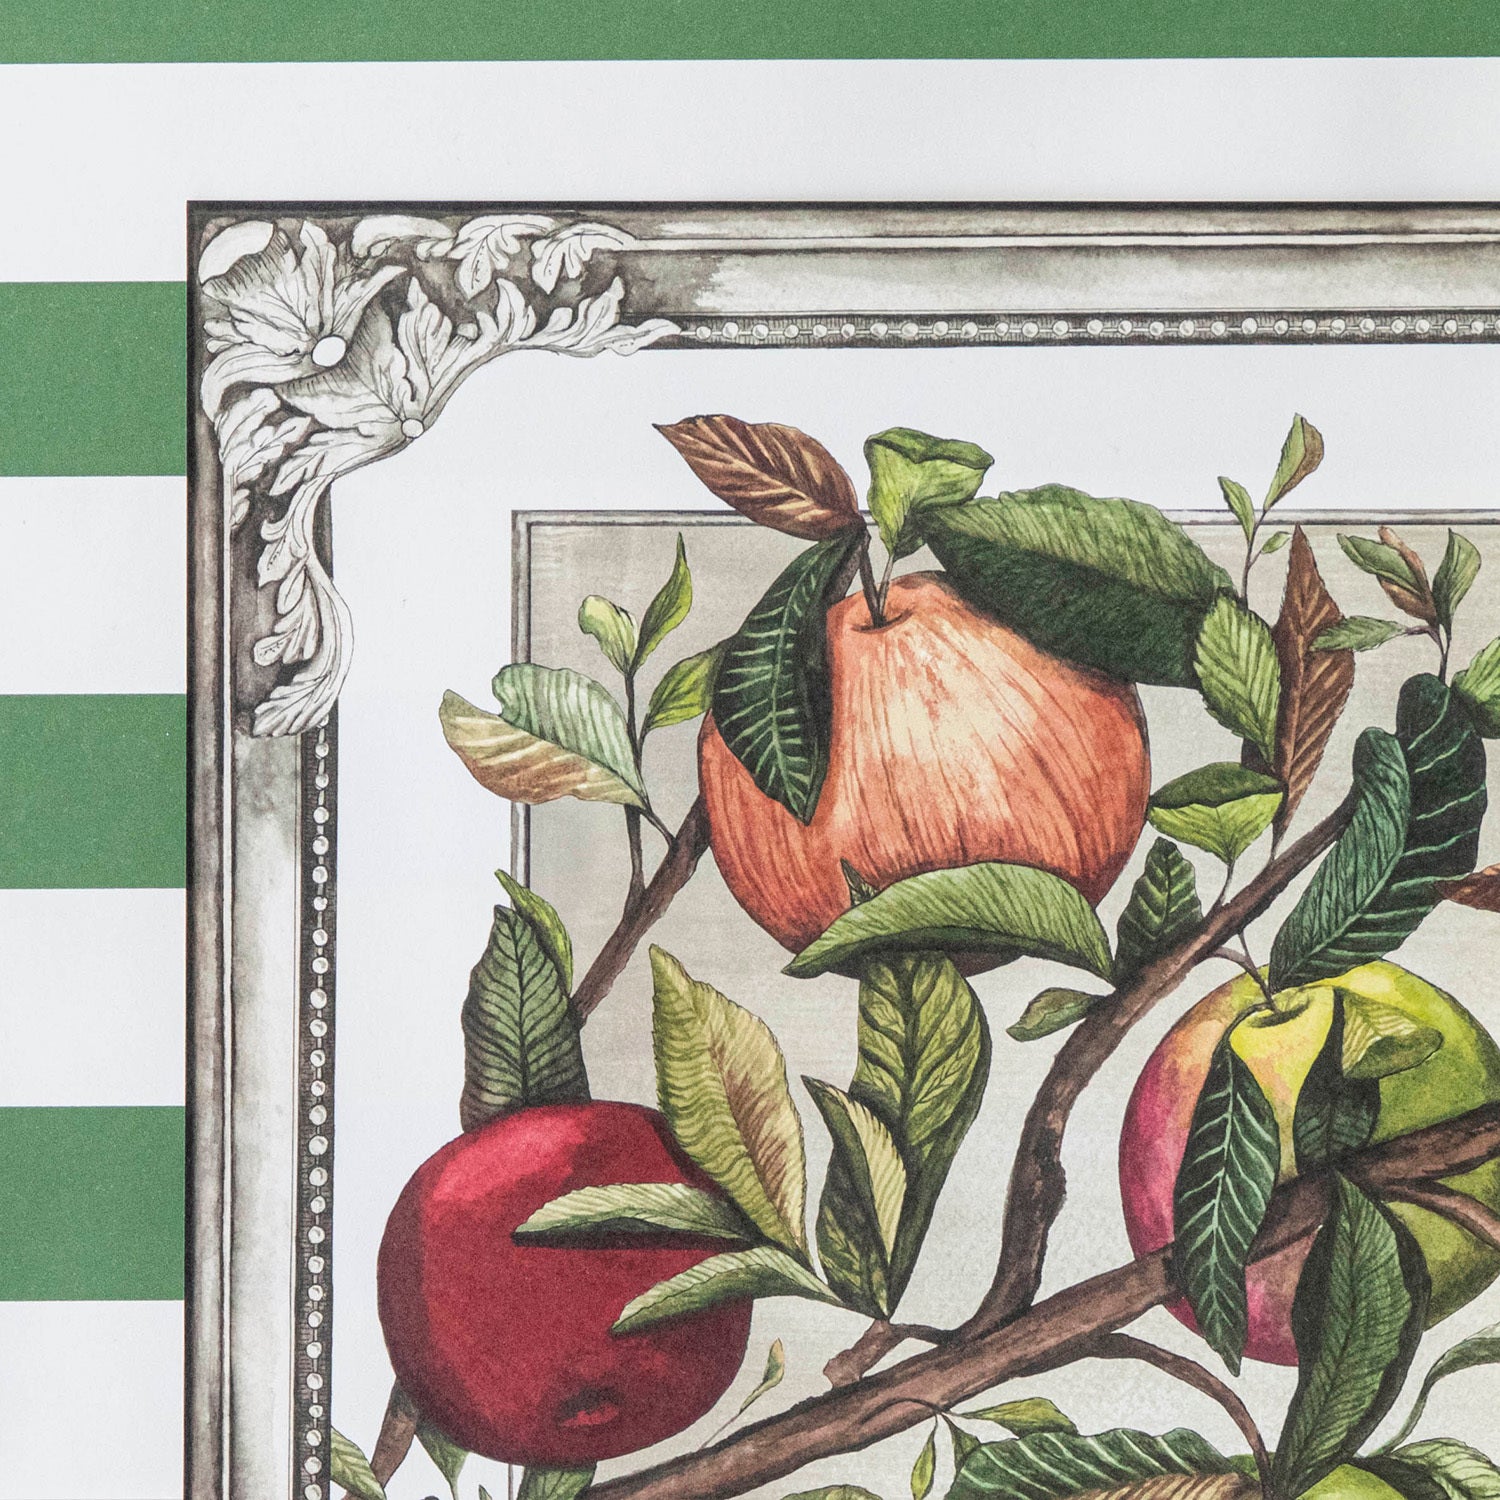 Close-up of the upper left corner of the Heirloom Apples Placemat, showing illustrated apples, leaves, and decorative frame in detail.